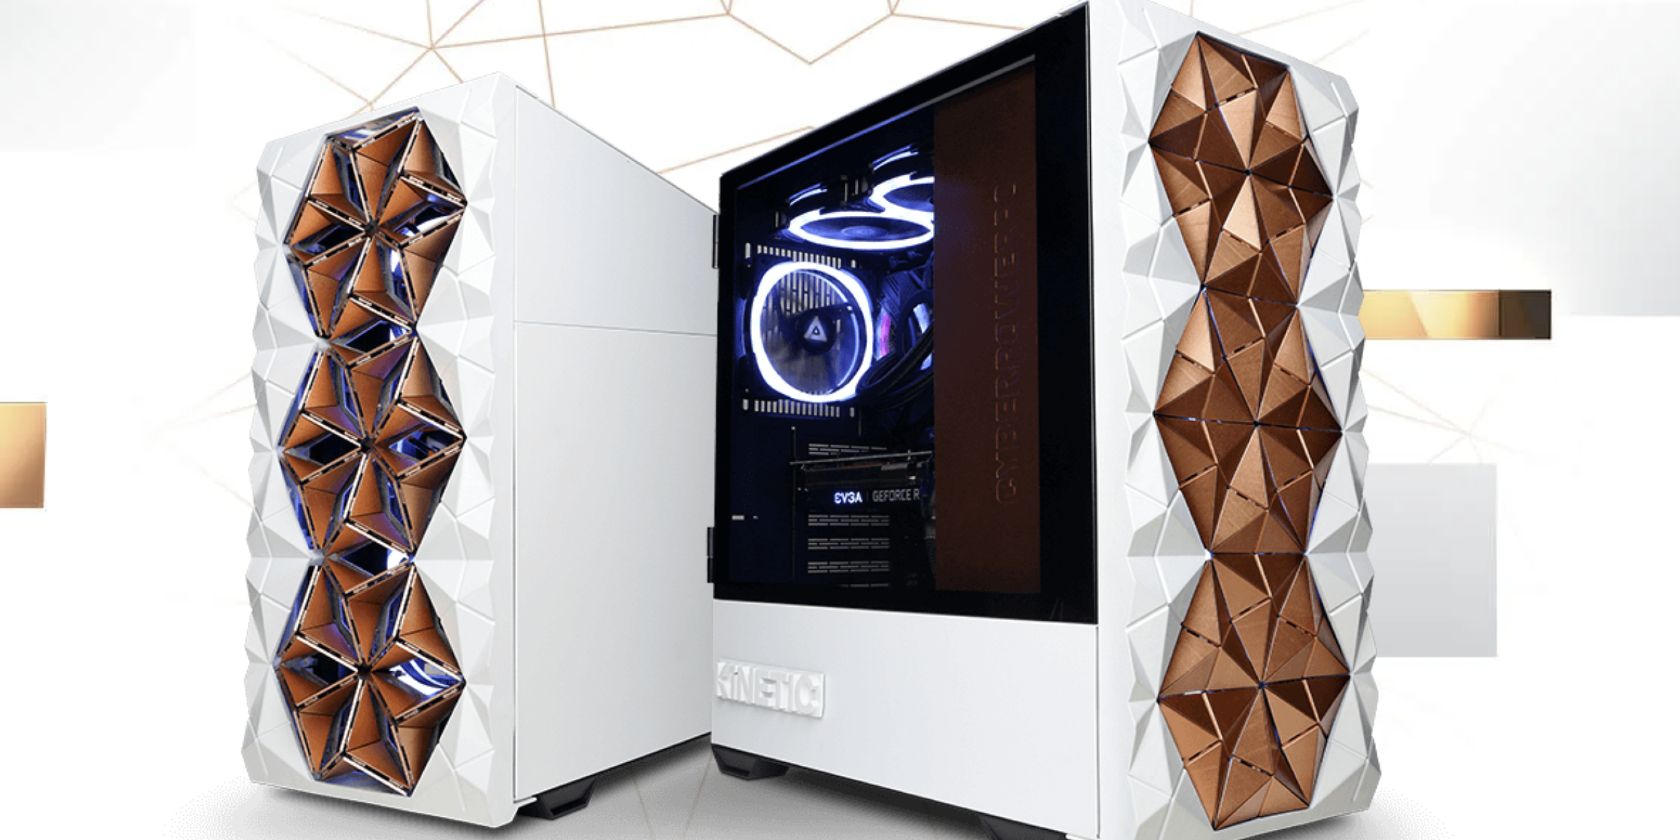 kinetic series case cyberpowerpc on white background